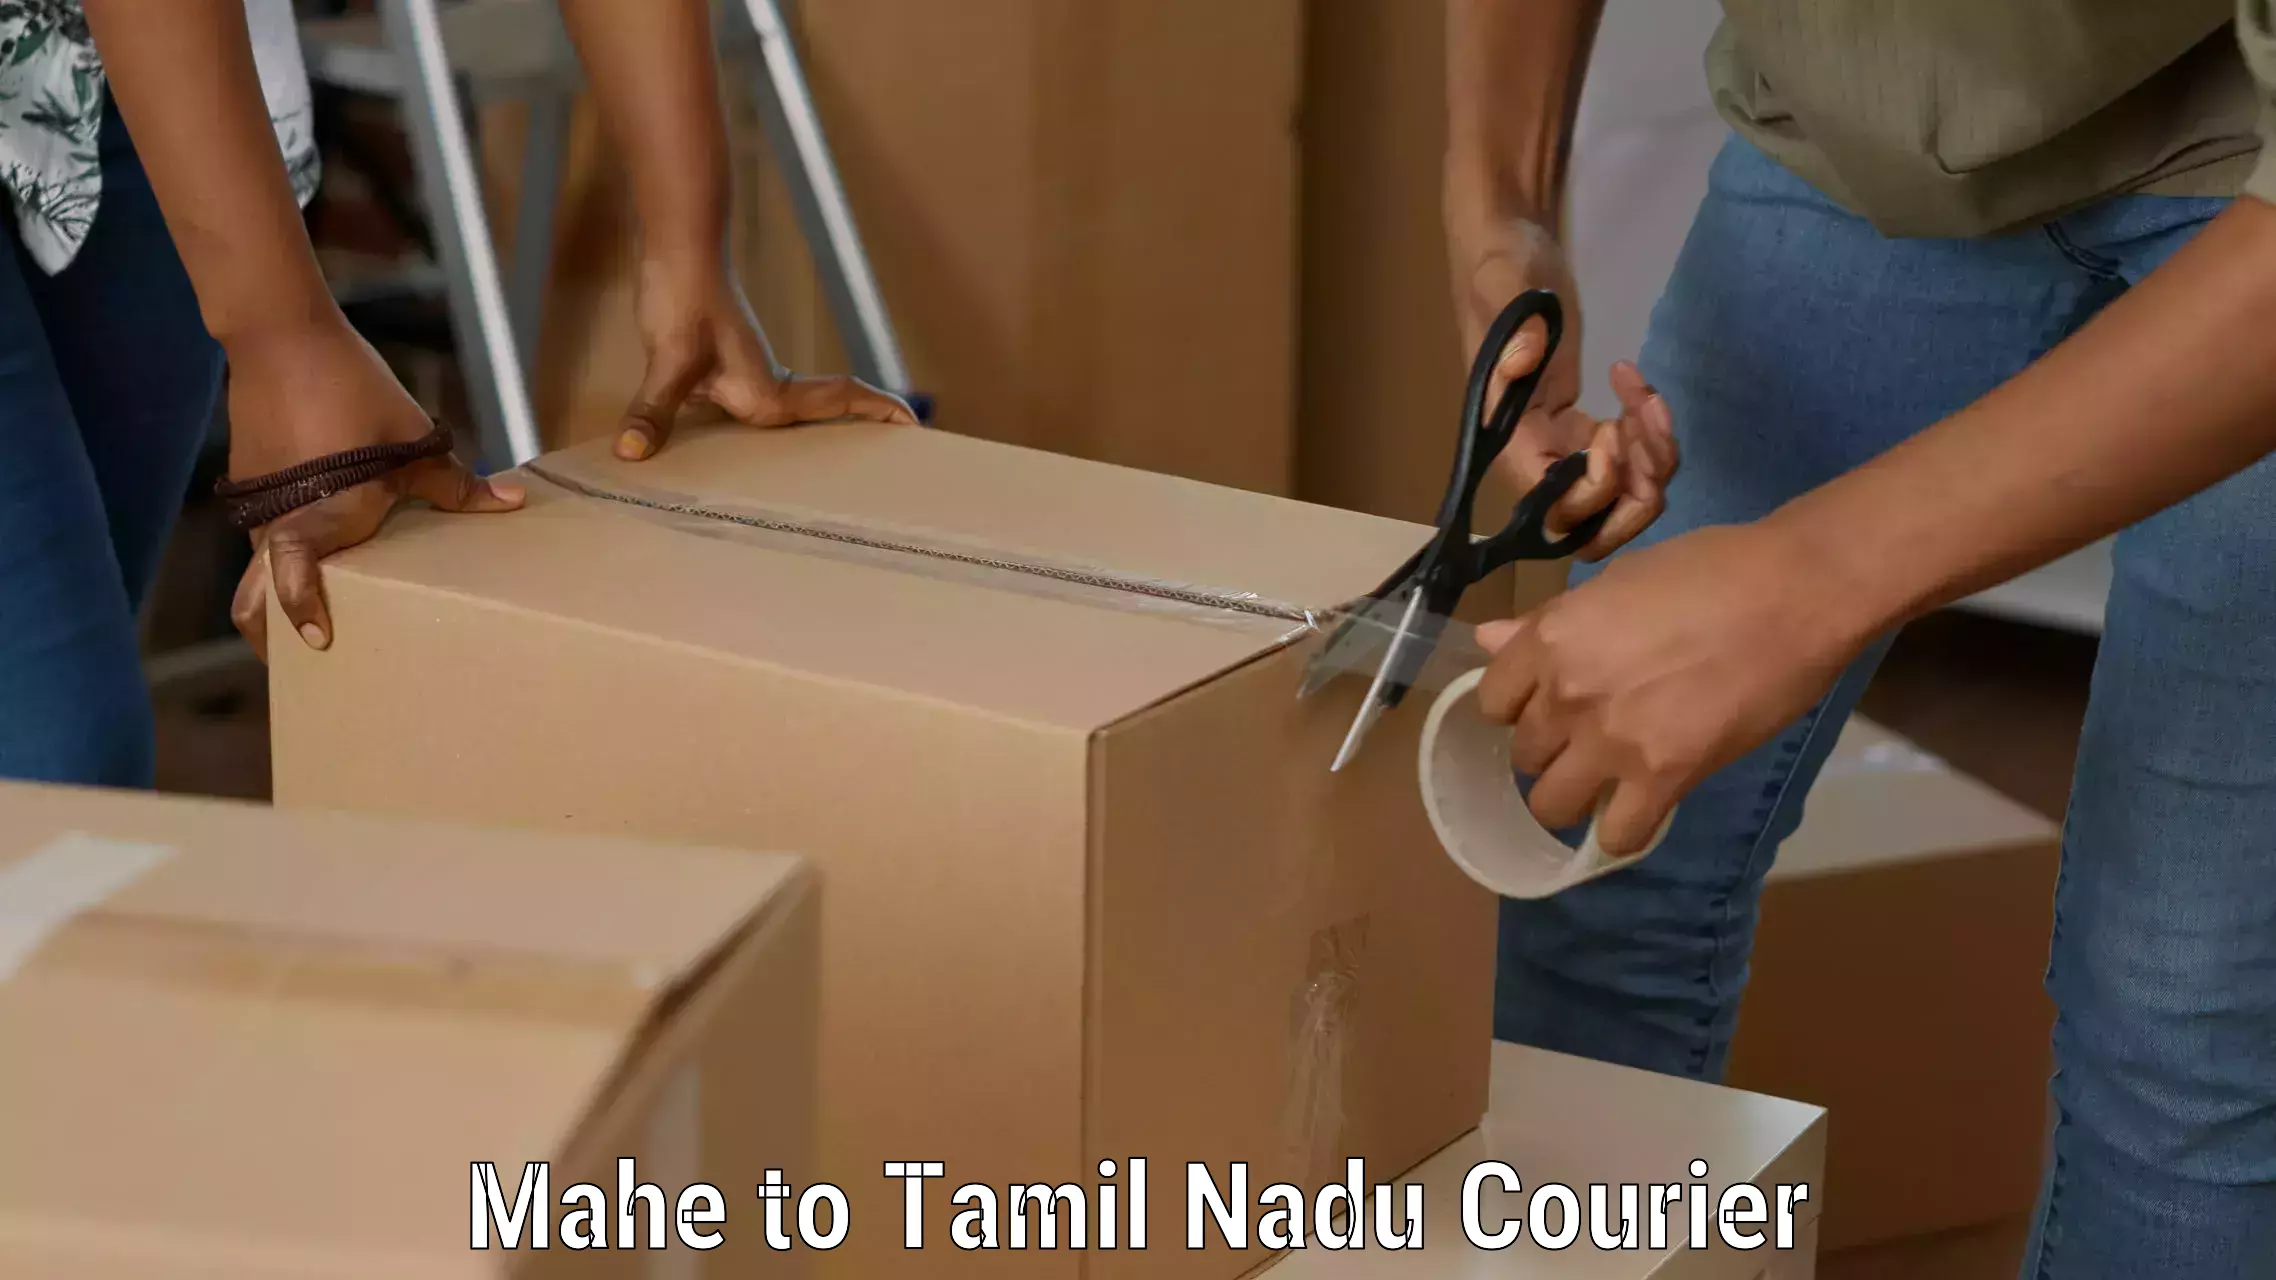 Reliable courier service Mahe to Ennore Port Chennai